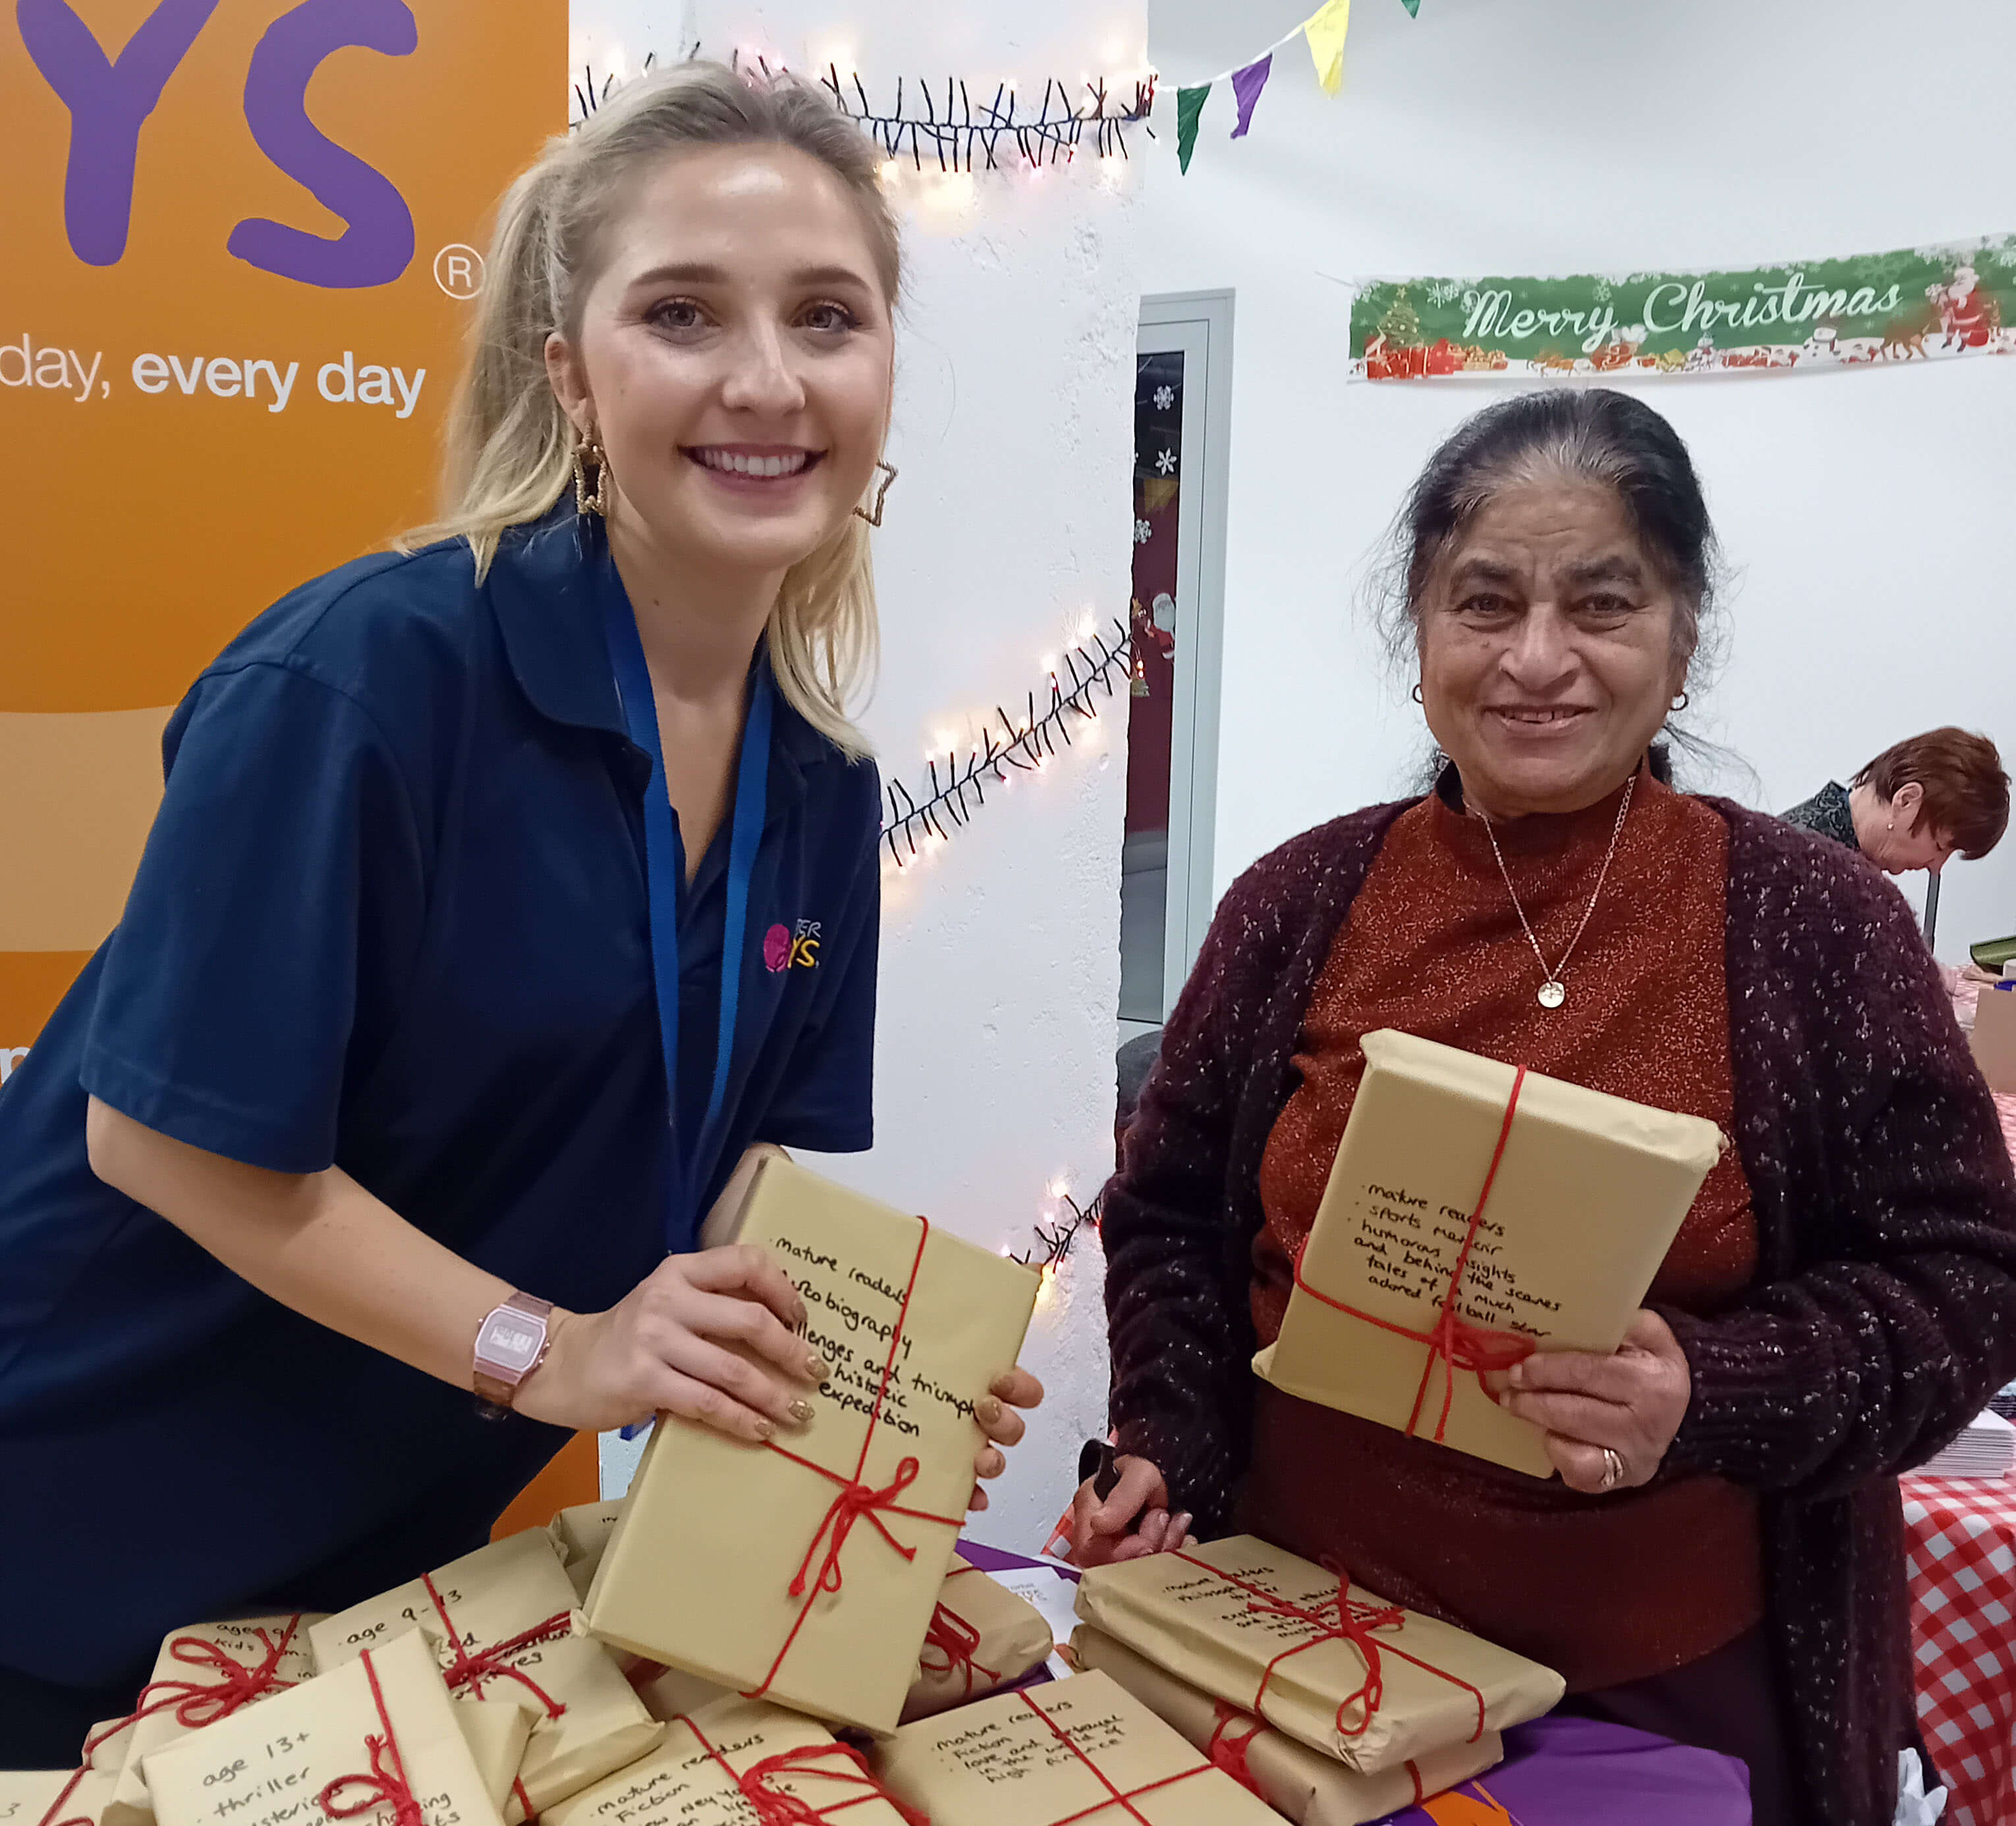 Two ladies holding wrapped gifts in brown paper and smiling